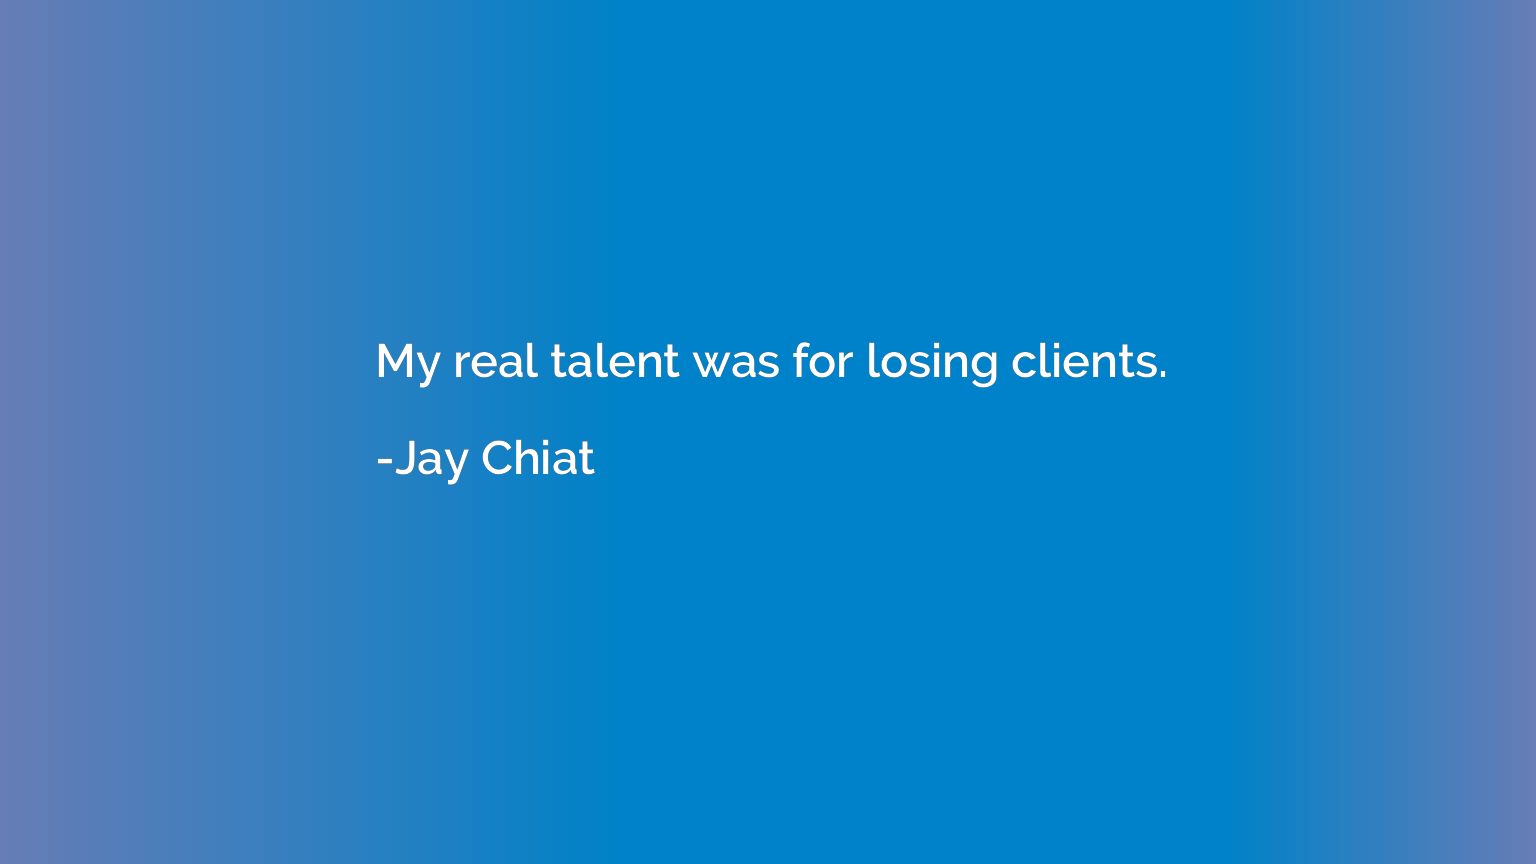 My real talent was for losing clients.